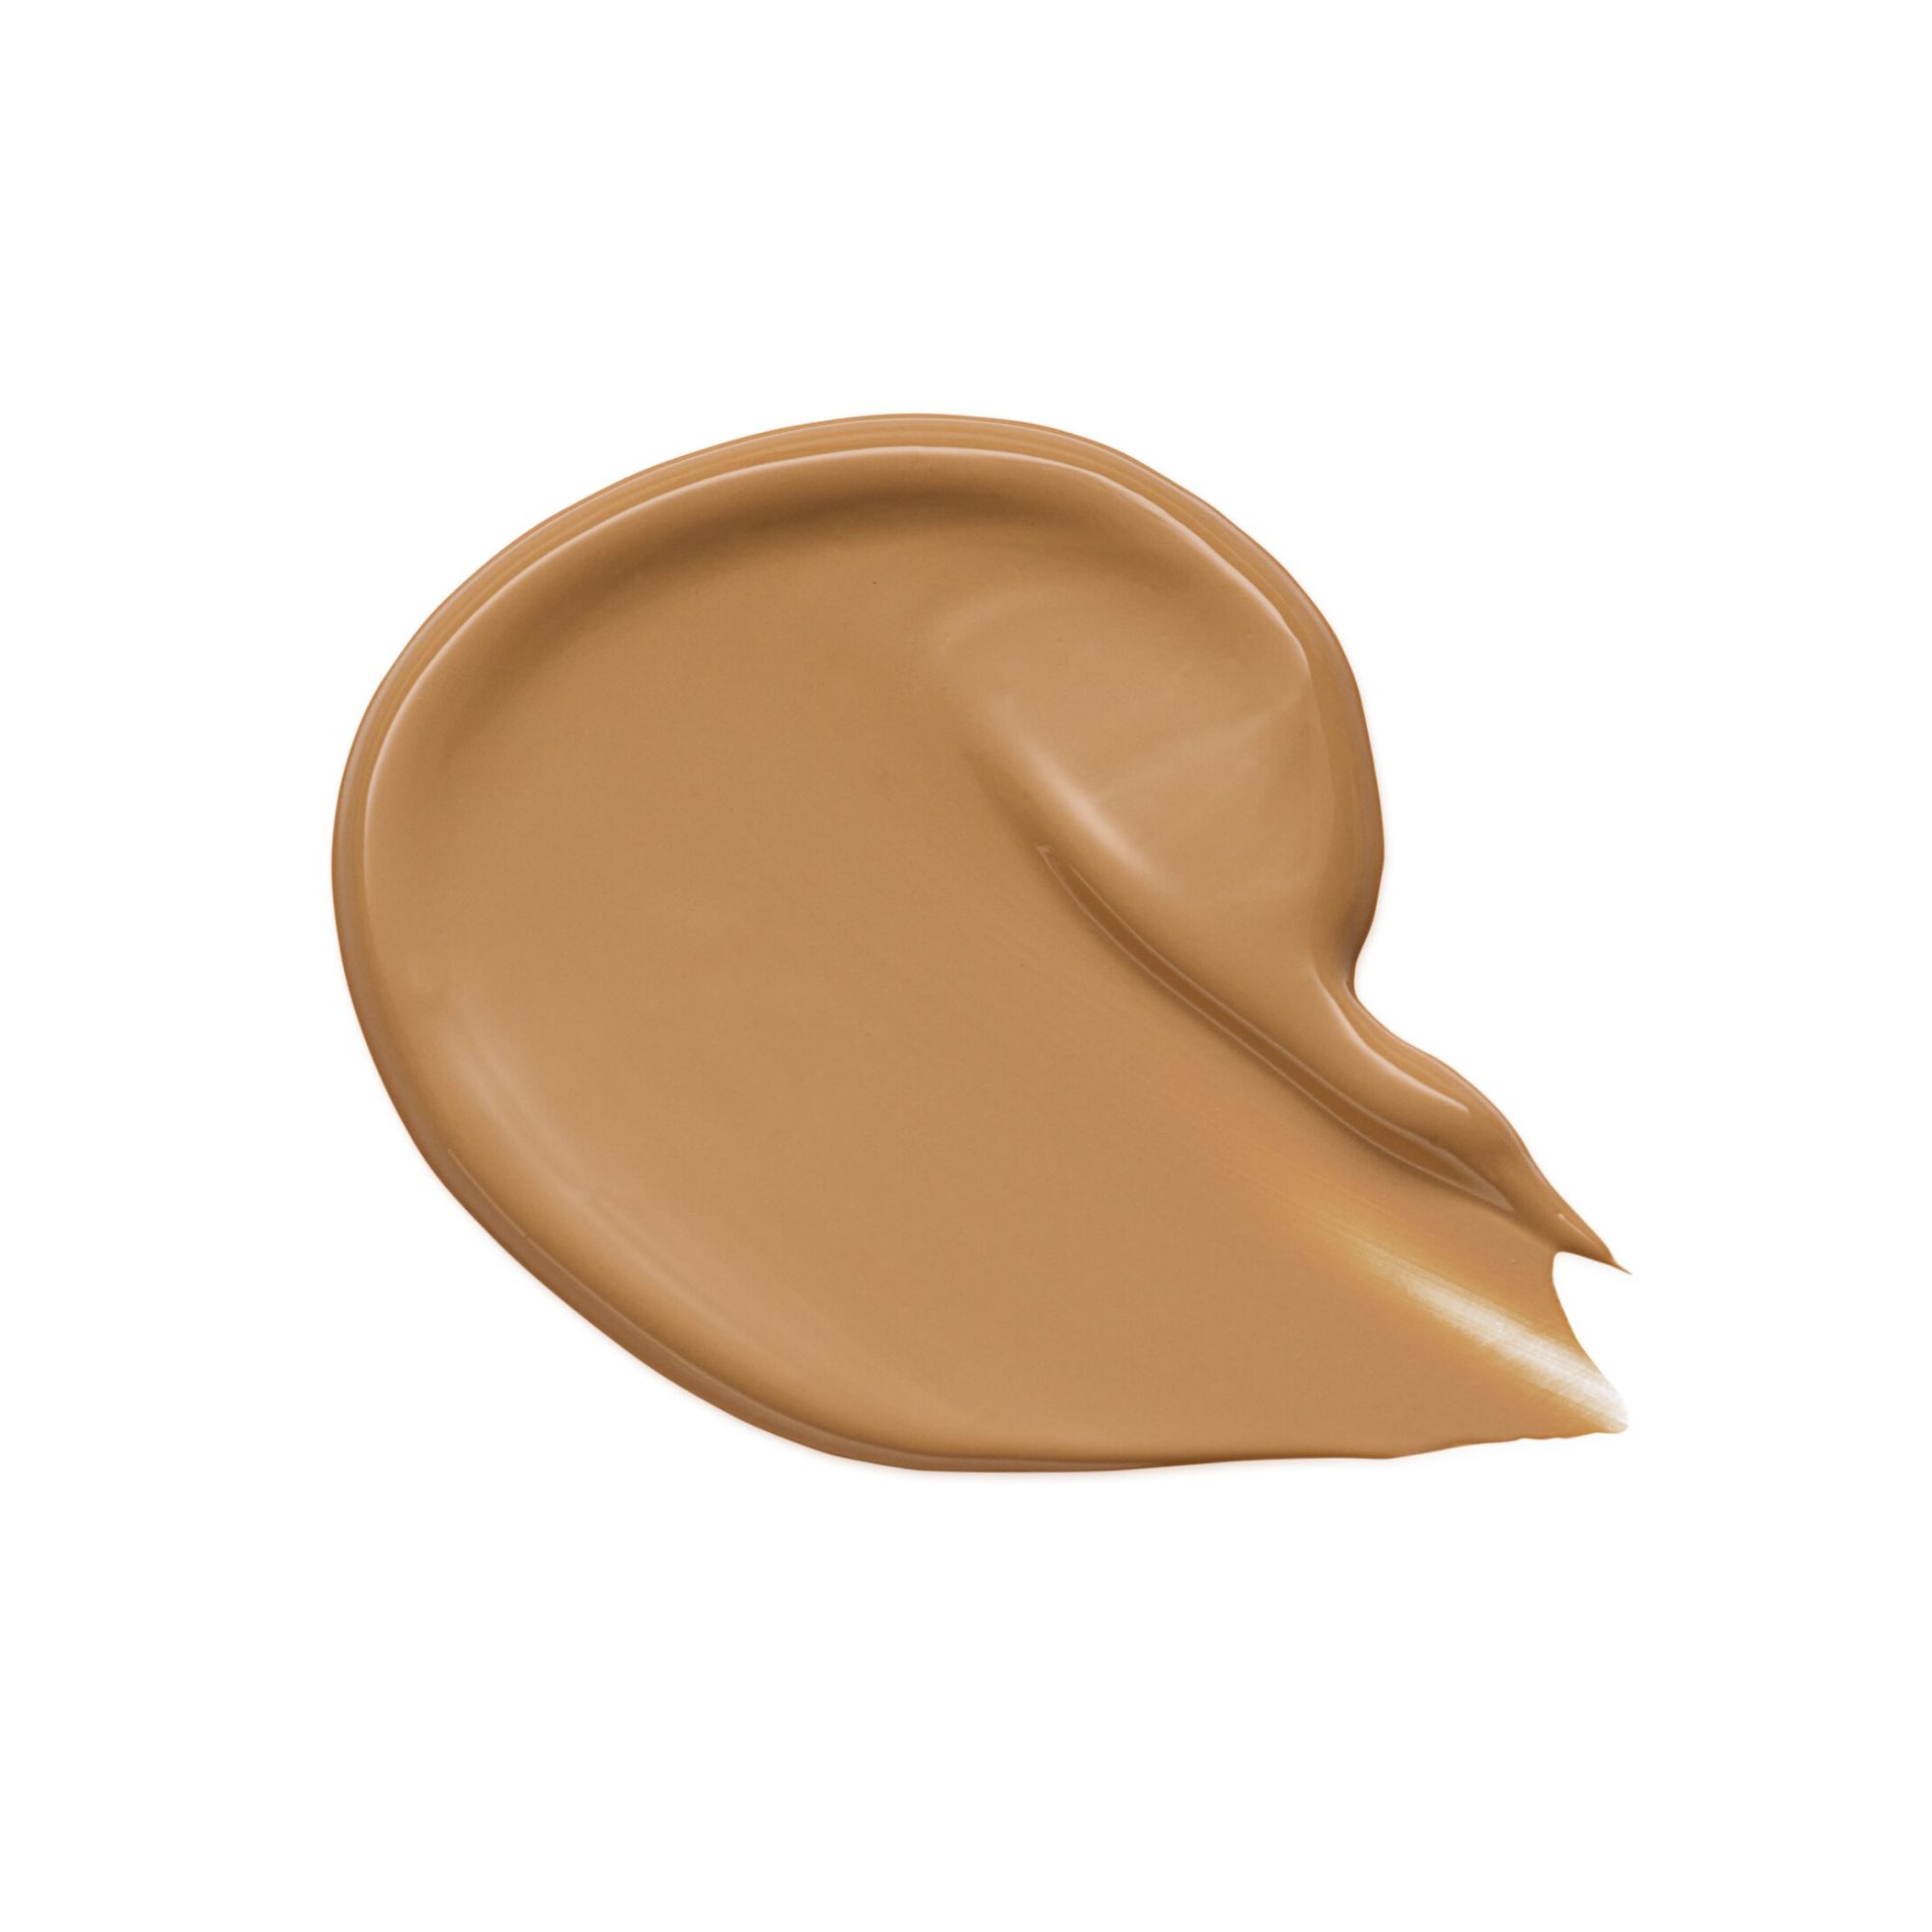 Foundation - Stay All Day 16h Long-Lasting Make-Up